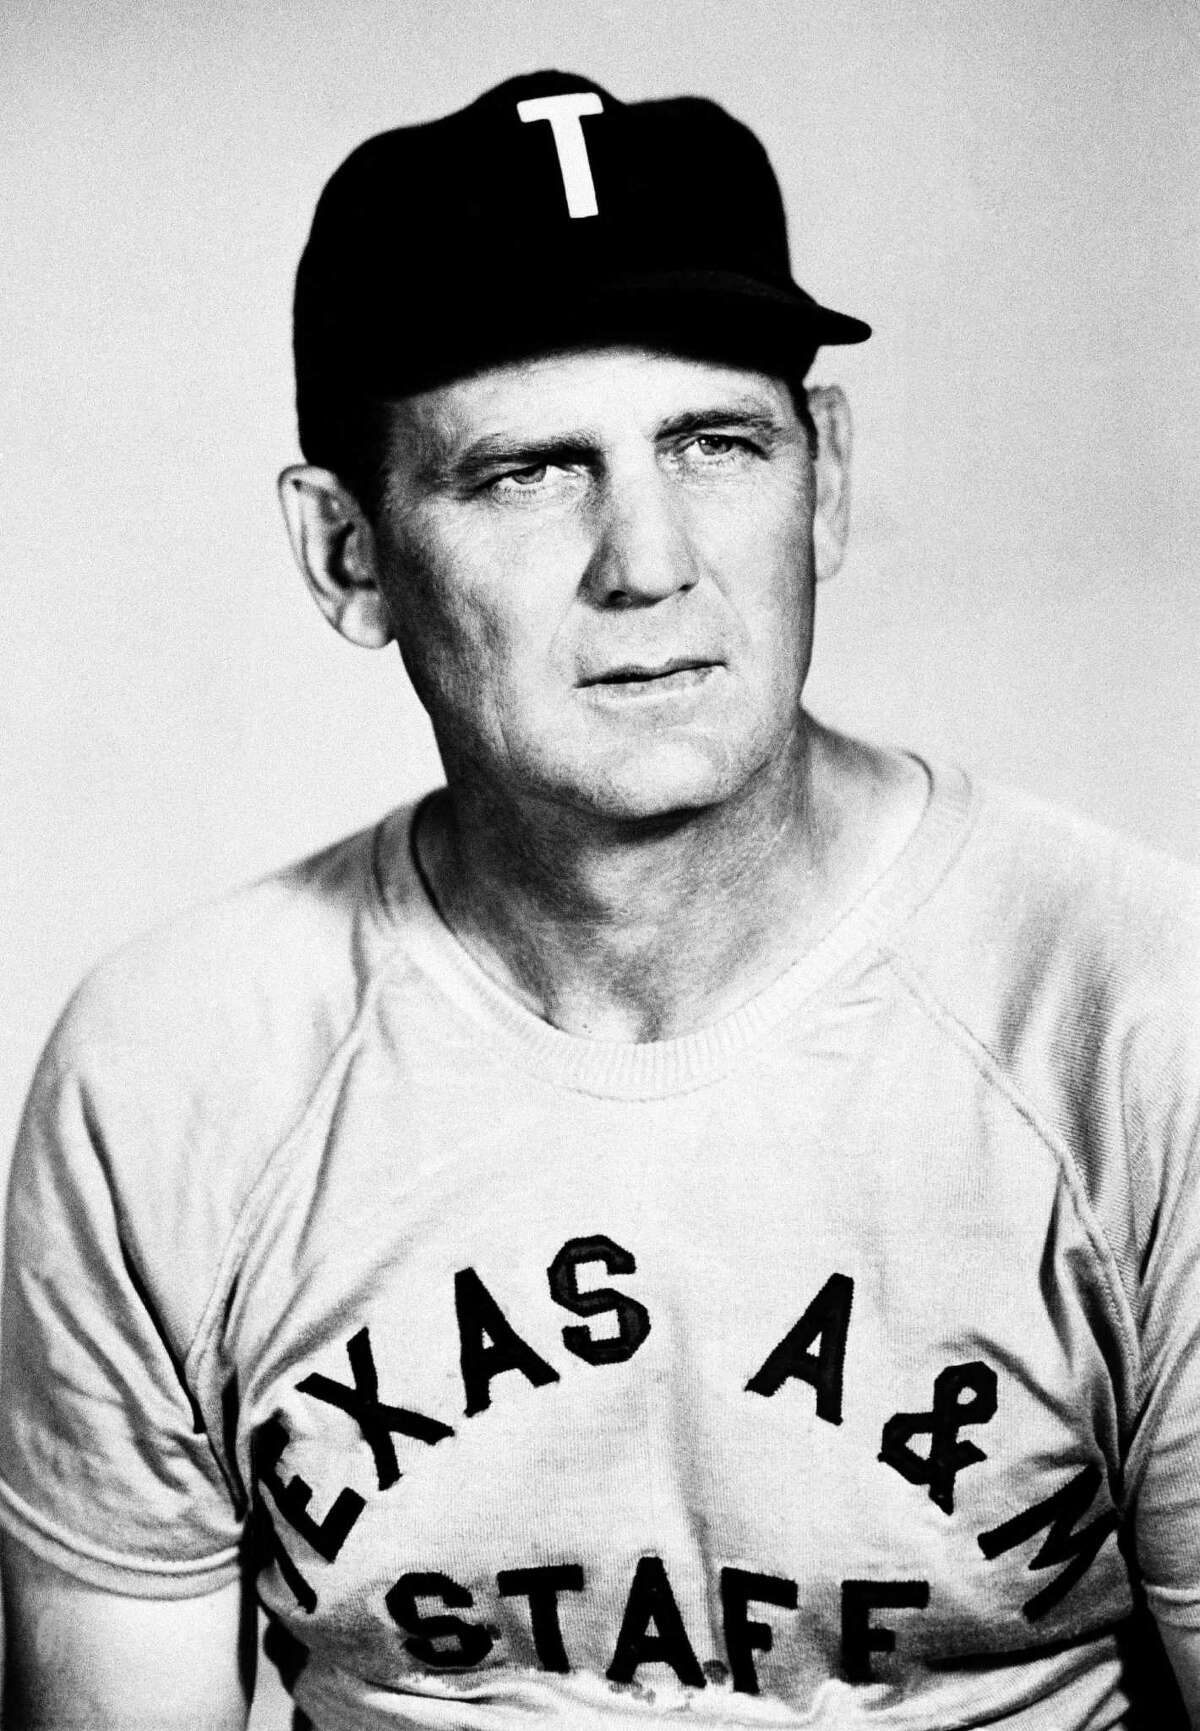 In this undated file photo, Texas A&M football coach Paul "Bear" Bryant is shown in a portrait. In the movie "The Junction Boys" coach Bear Bryant, played by Tom Berenger, takes his first Texas A&M team to scorching Junction, Texas, for 10 days of training camp and turns his losers into winners.